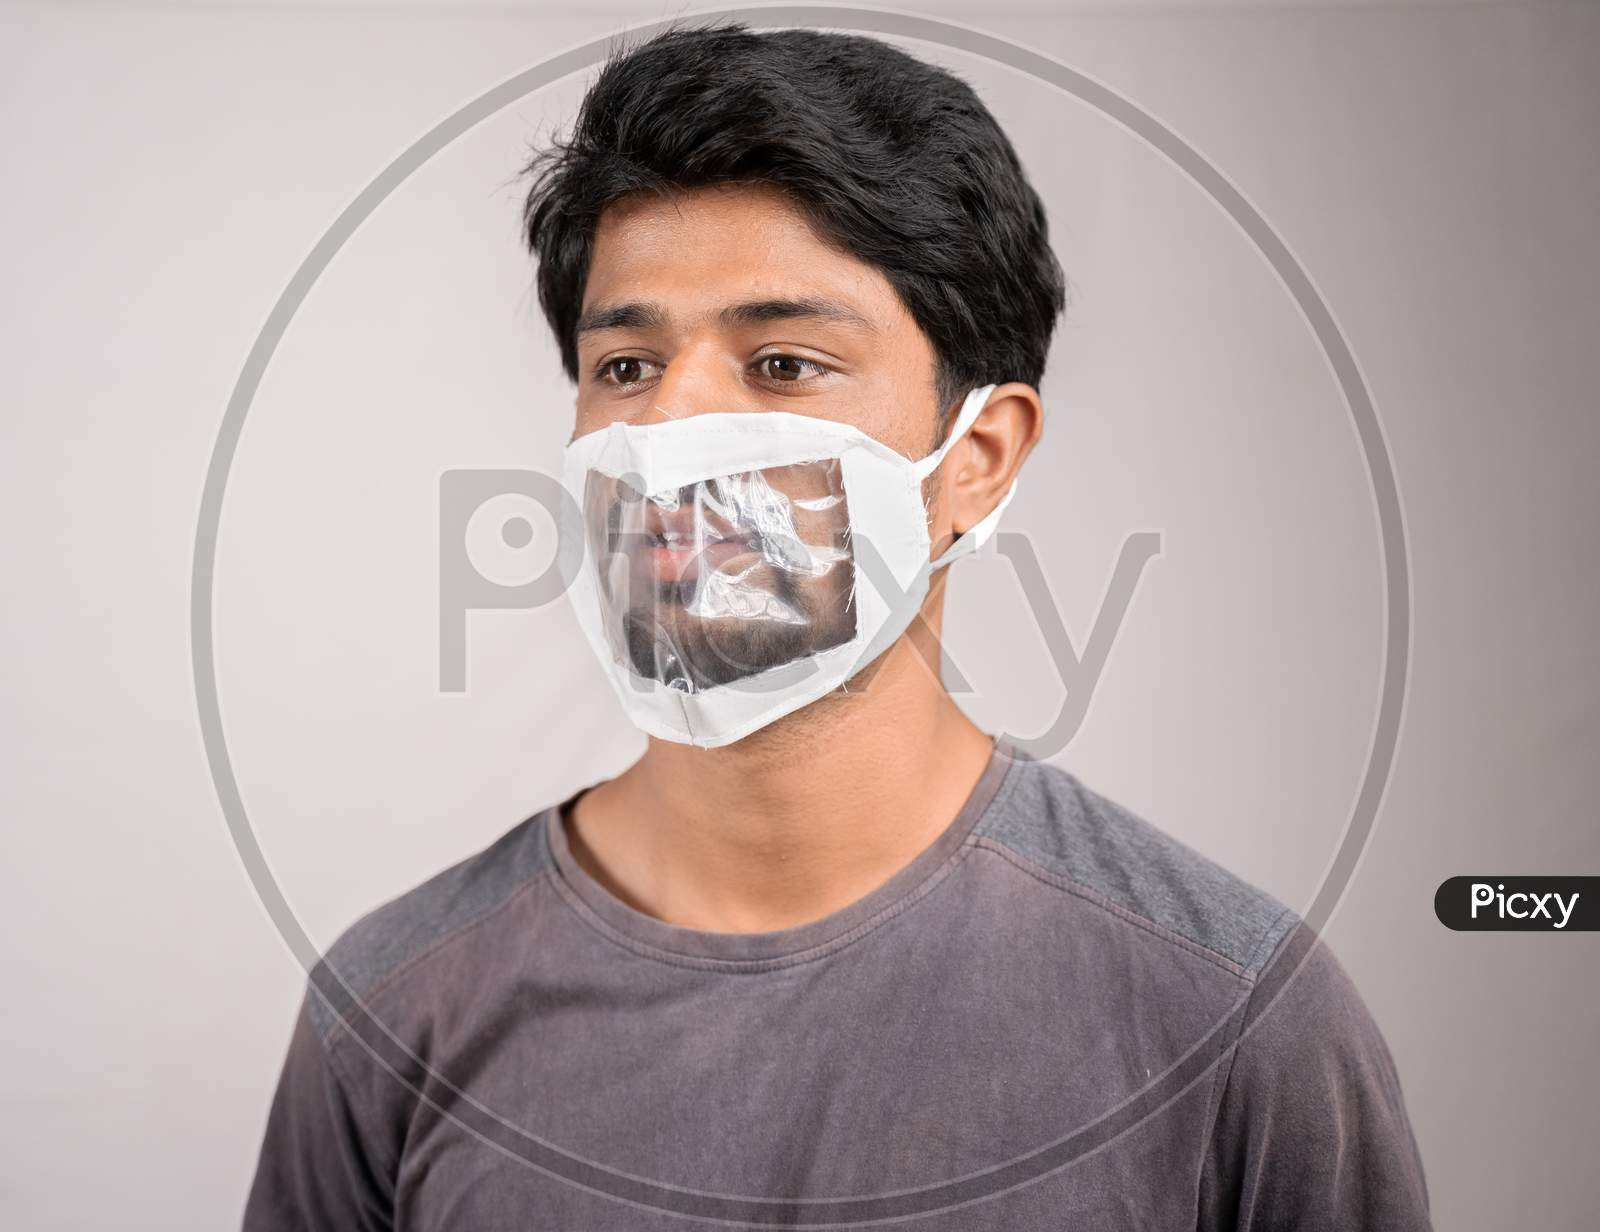 Young Man With Transparent Medical Face Mask, To Help Hearing Imperimeant Or Deaf People To Understand Lipreading During Coronavirus Or Covid-19 Outbreak